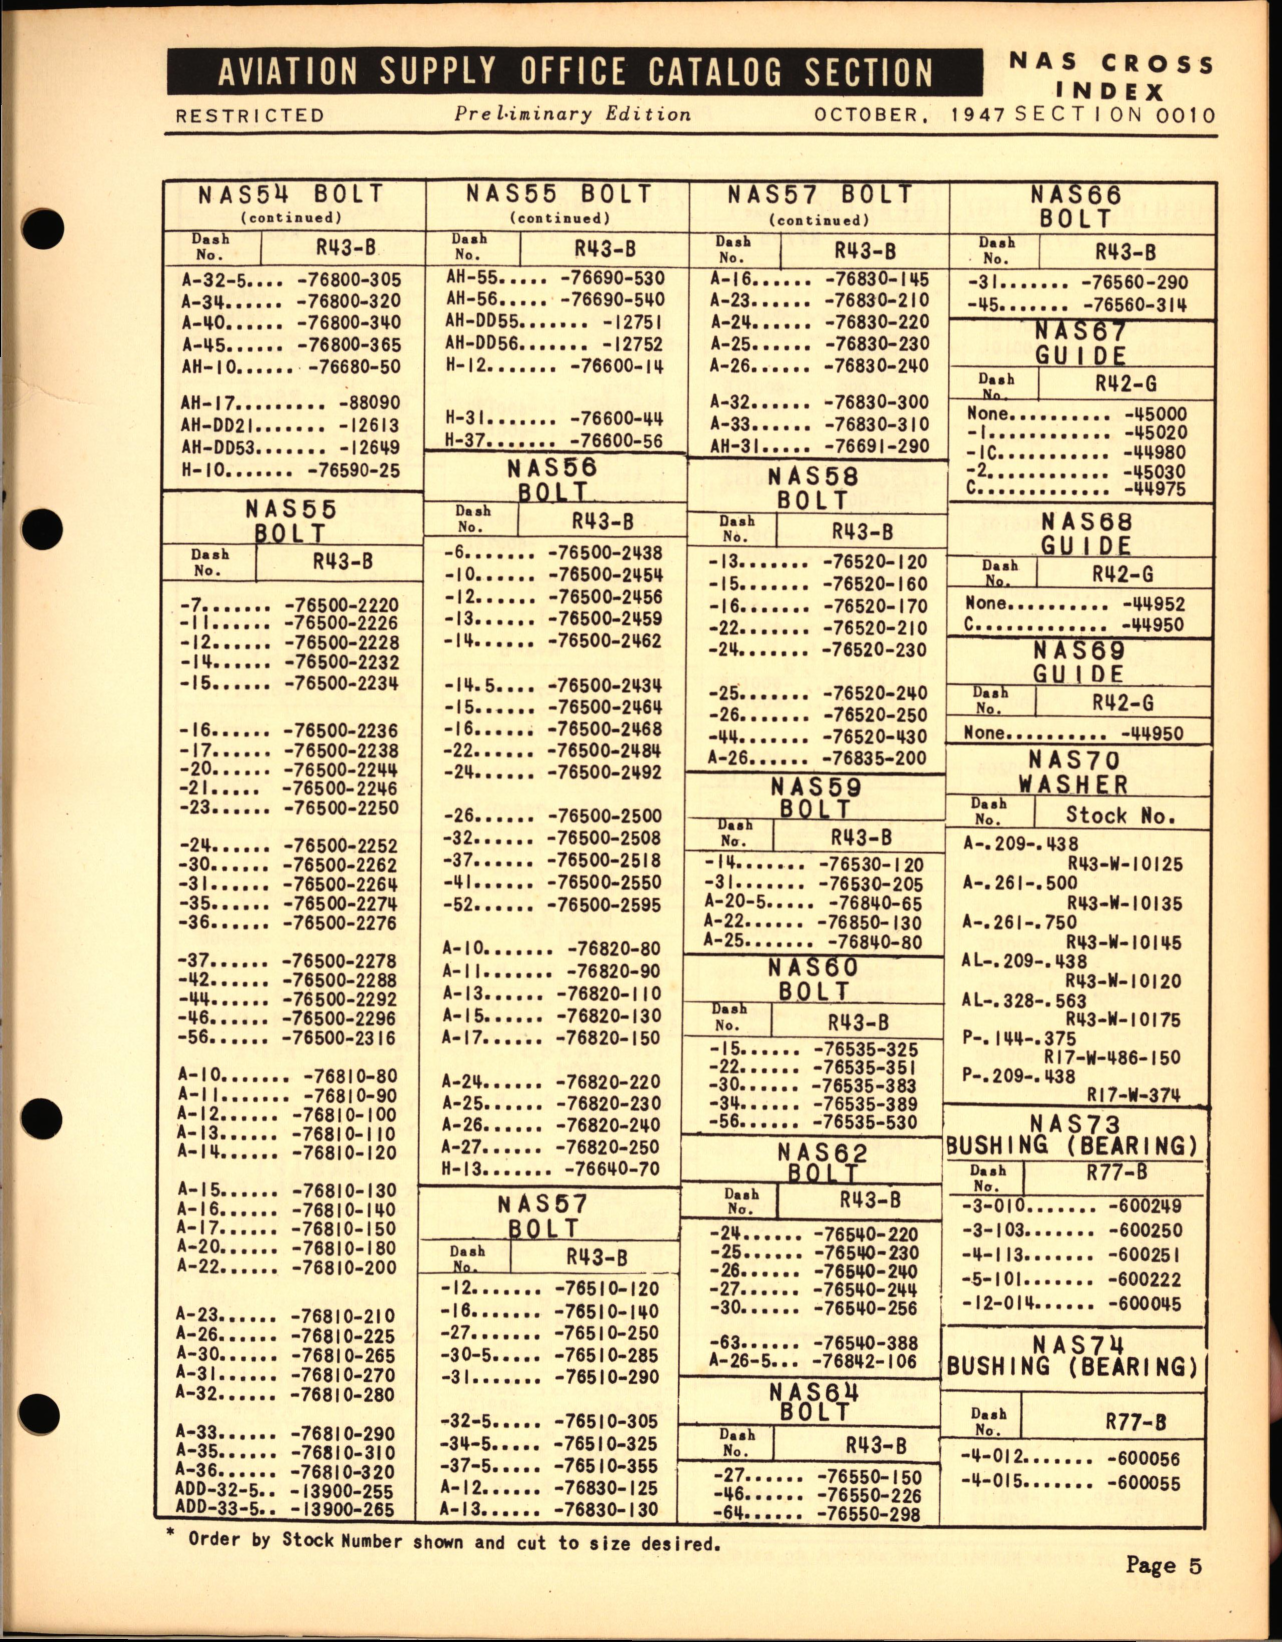 Sample page 5 from AirCorps Library document: NAS Cross Index